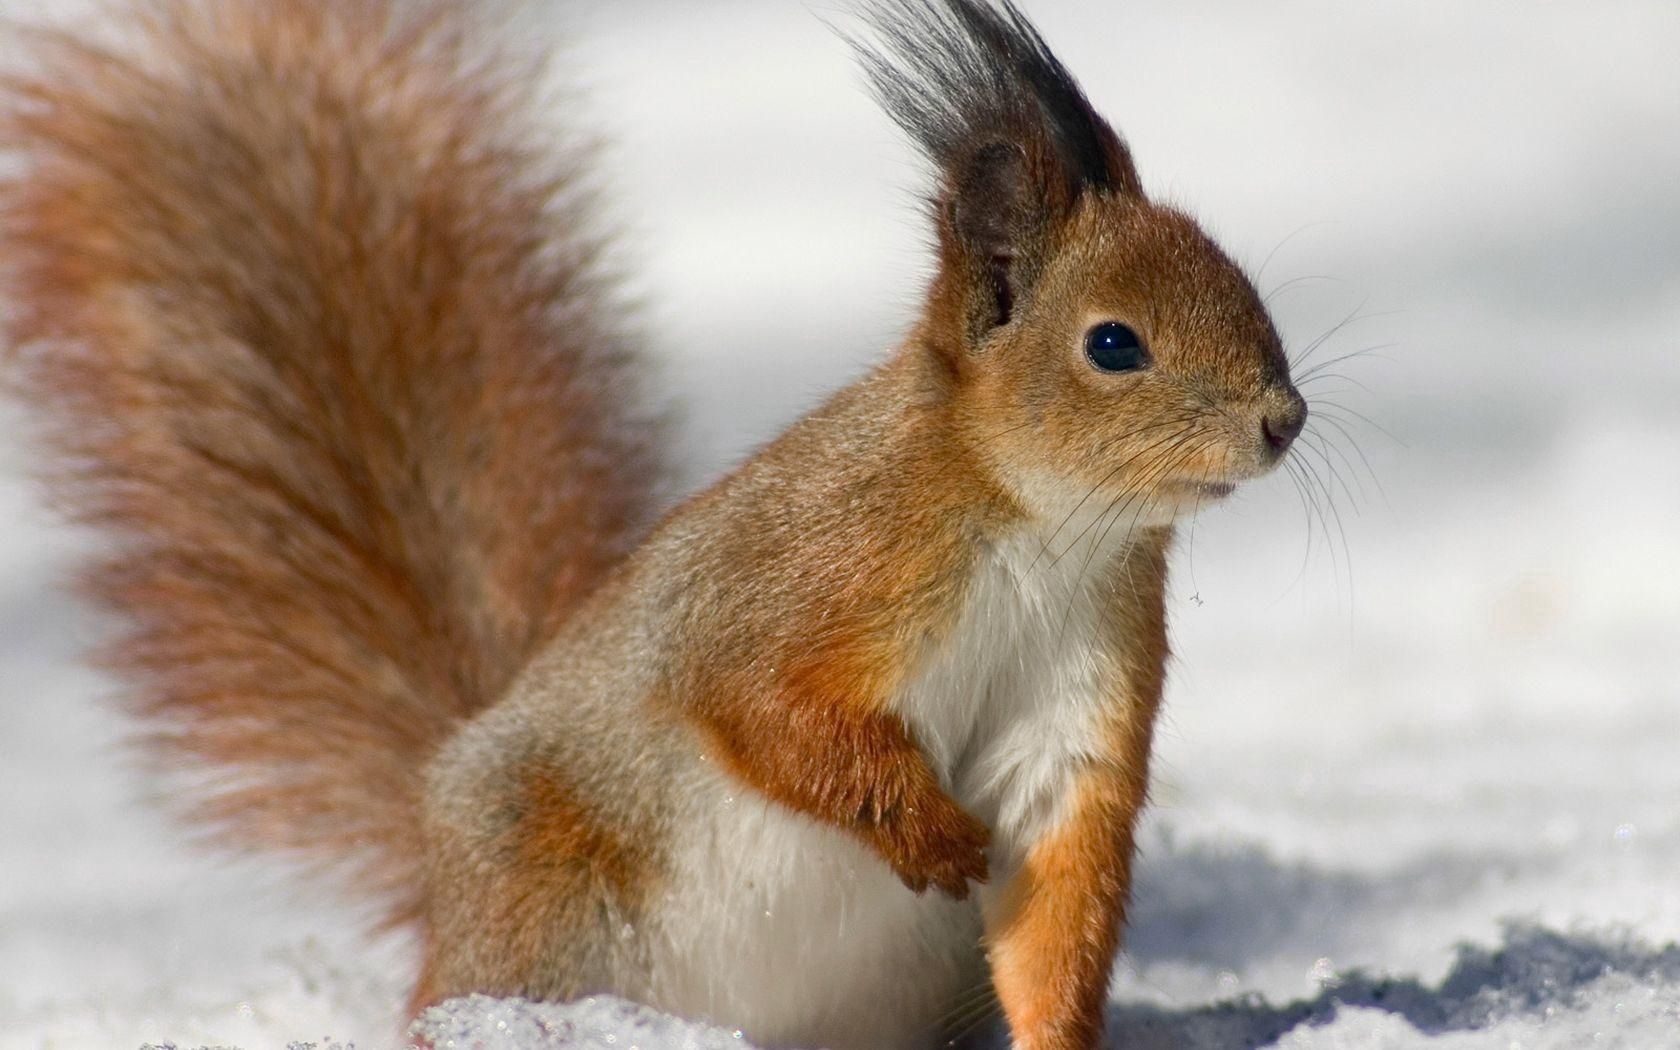 animals, squirrel, fluffy, sight, opinion, tail, fur